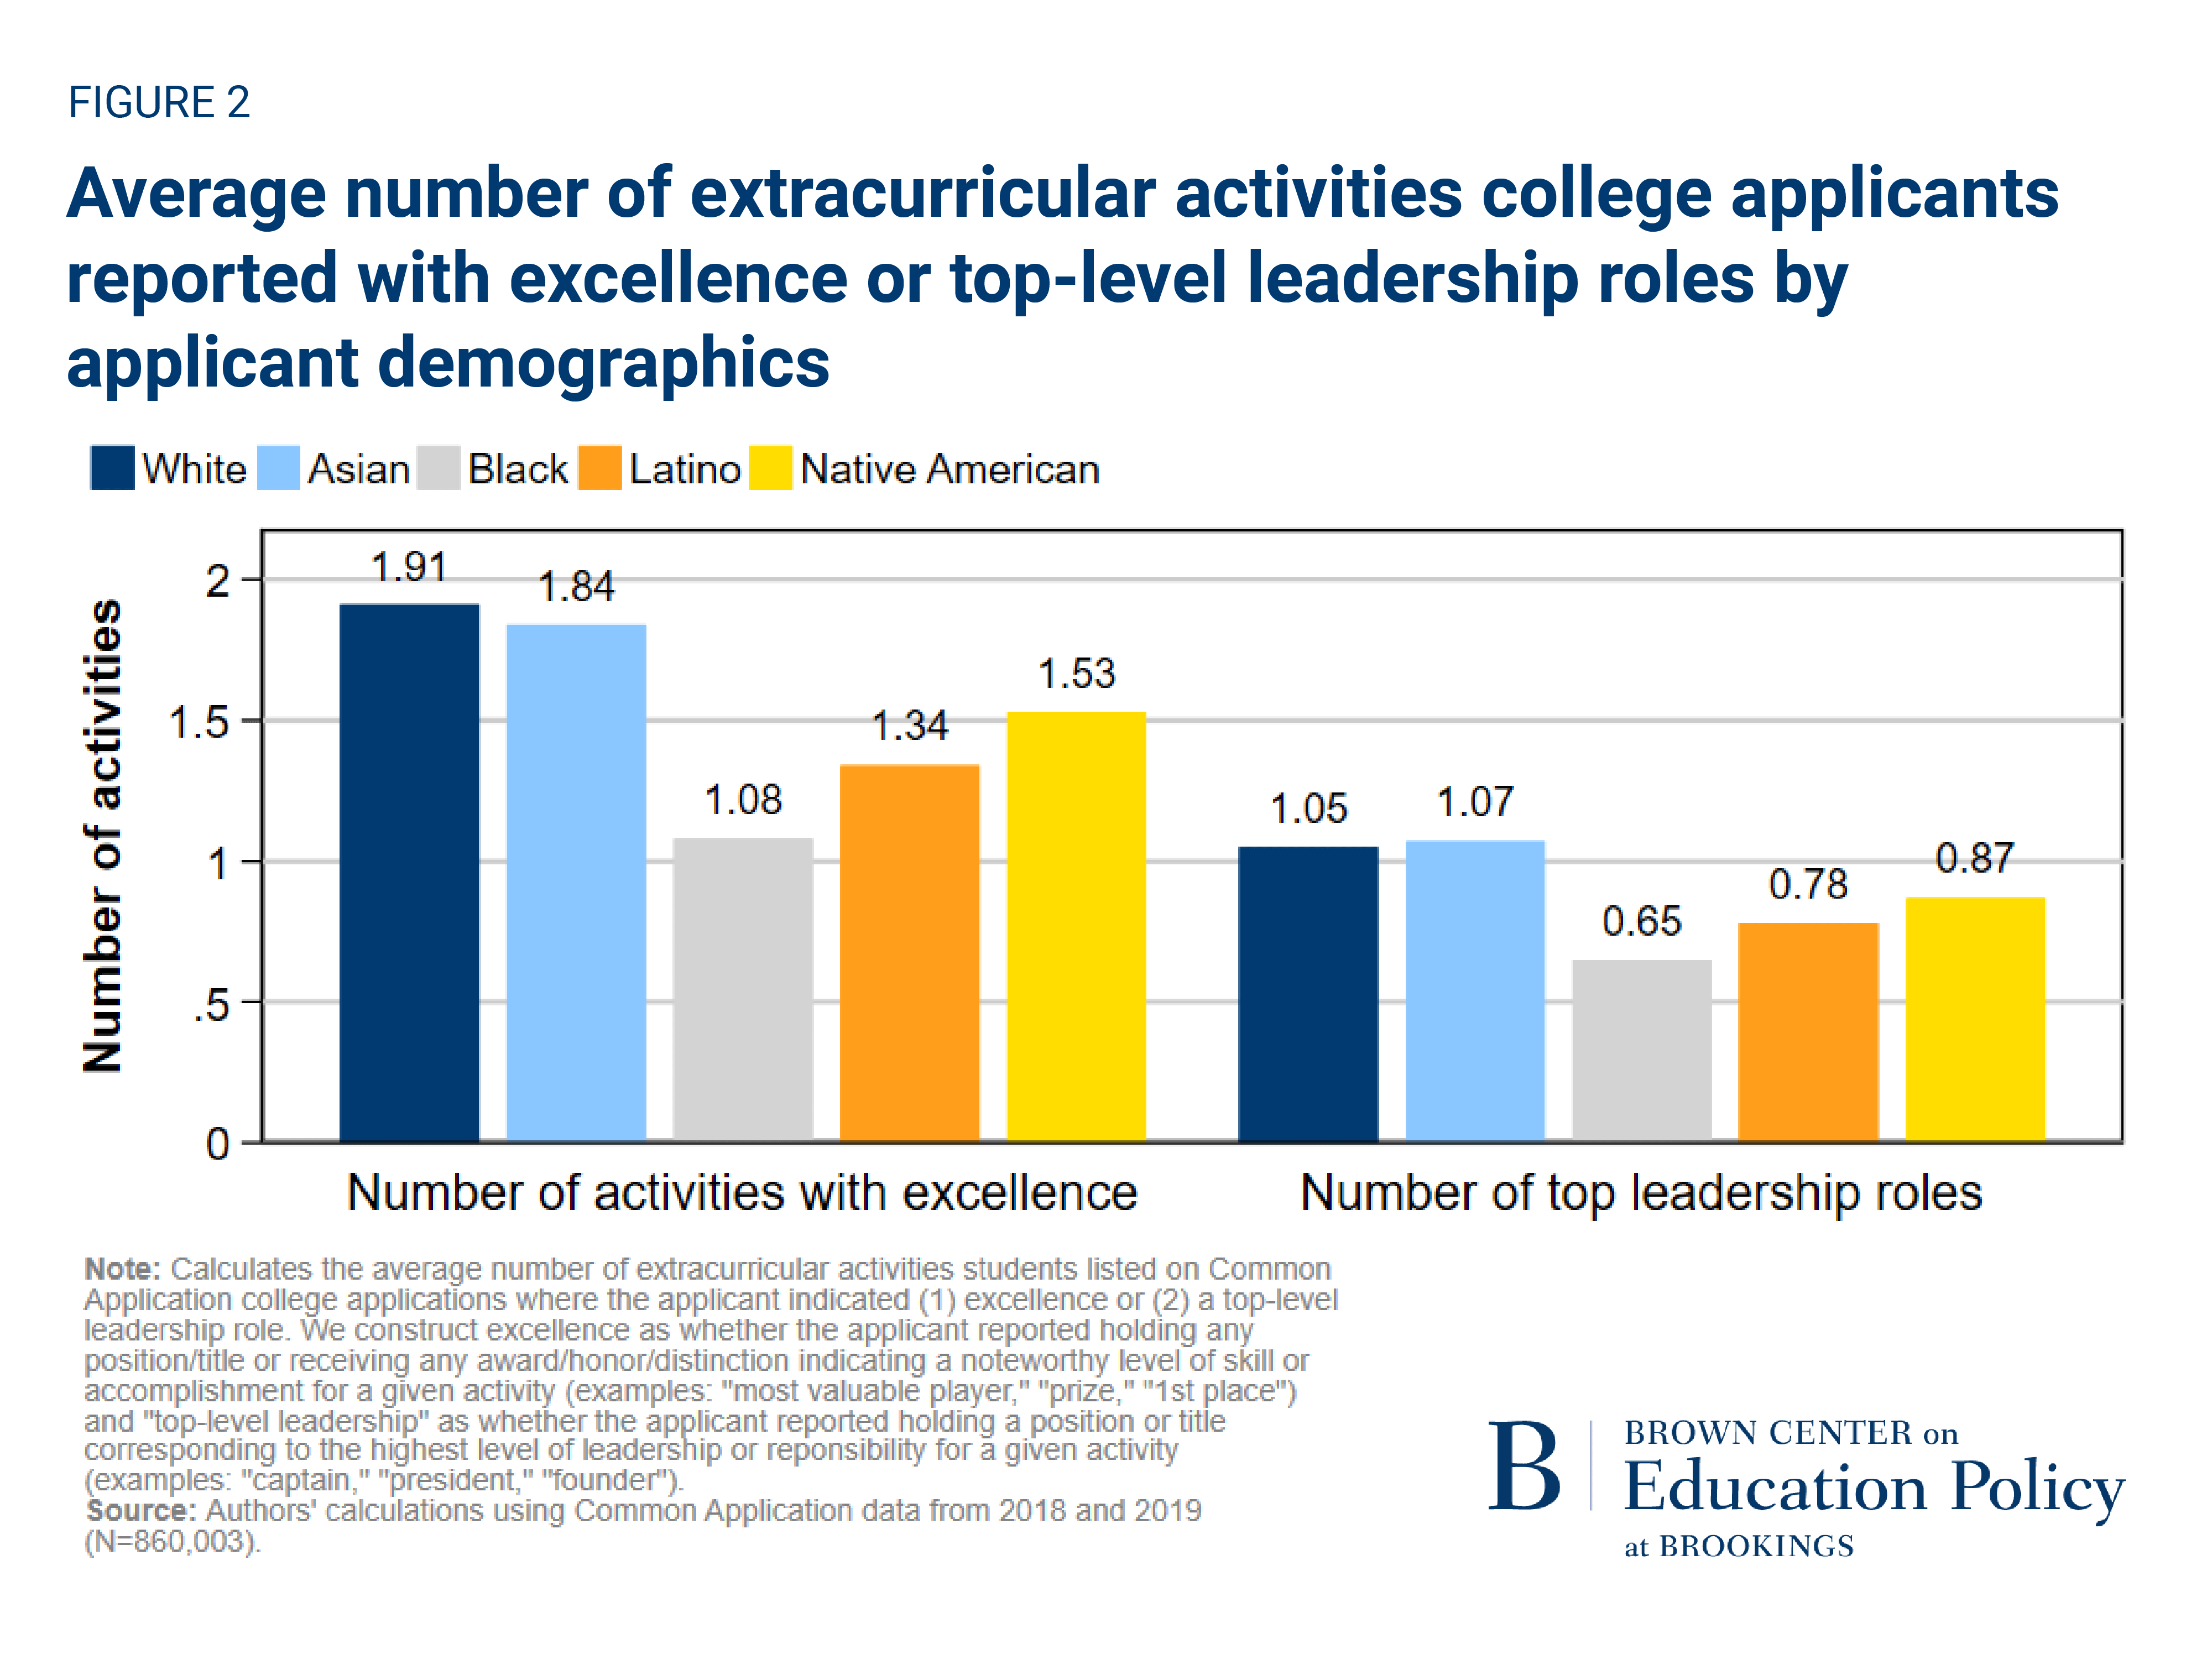 average number of extracurricular activities college applicants reported with excellence or top-level leadership roles by applicant demographics